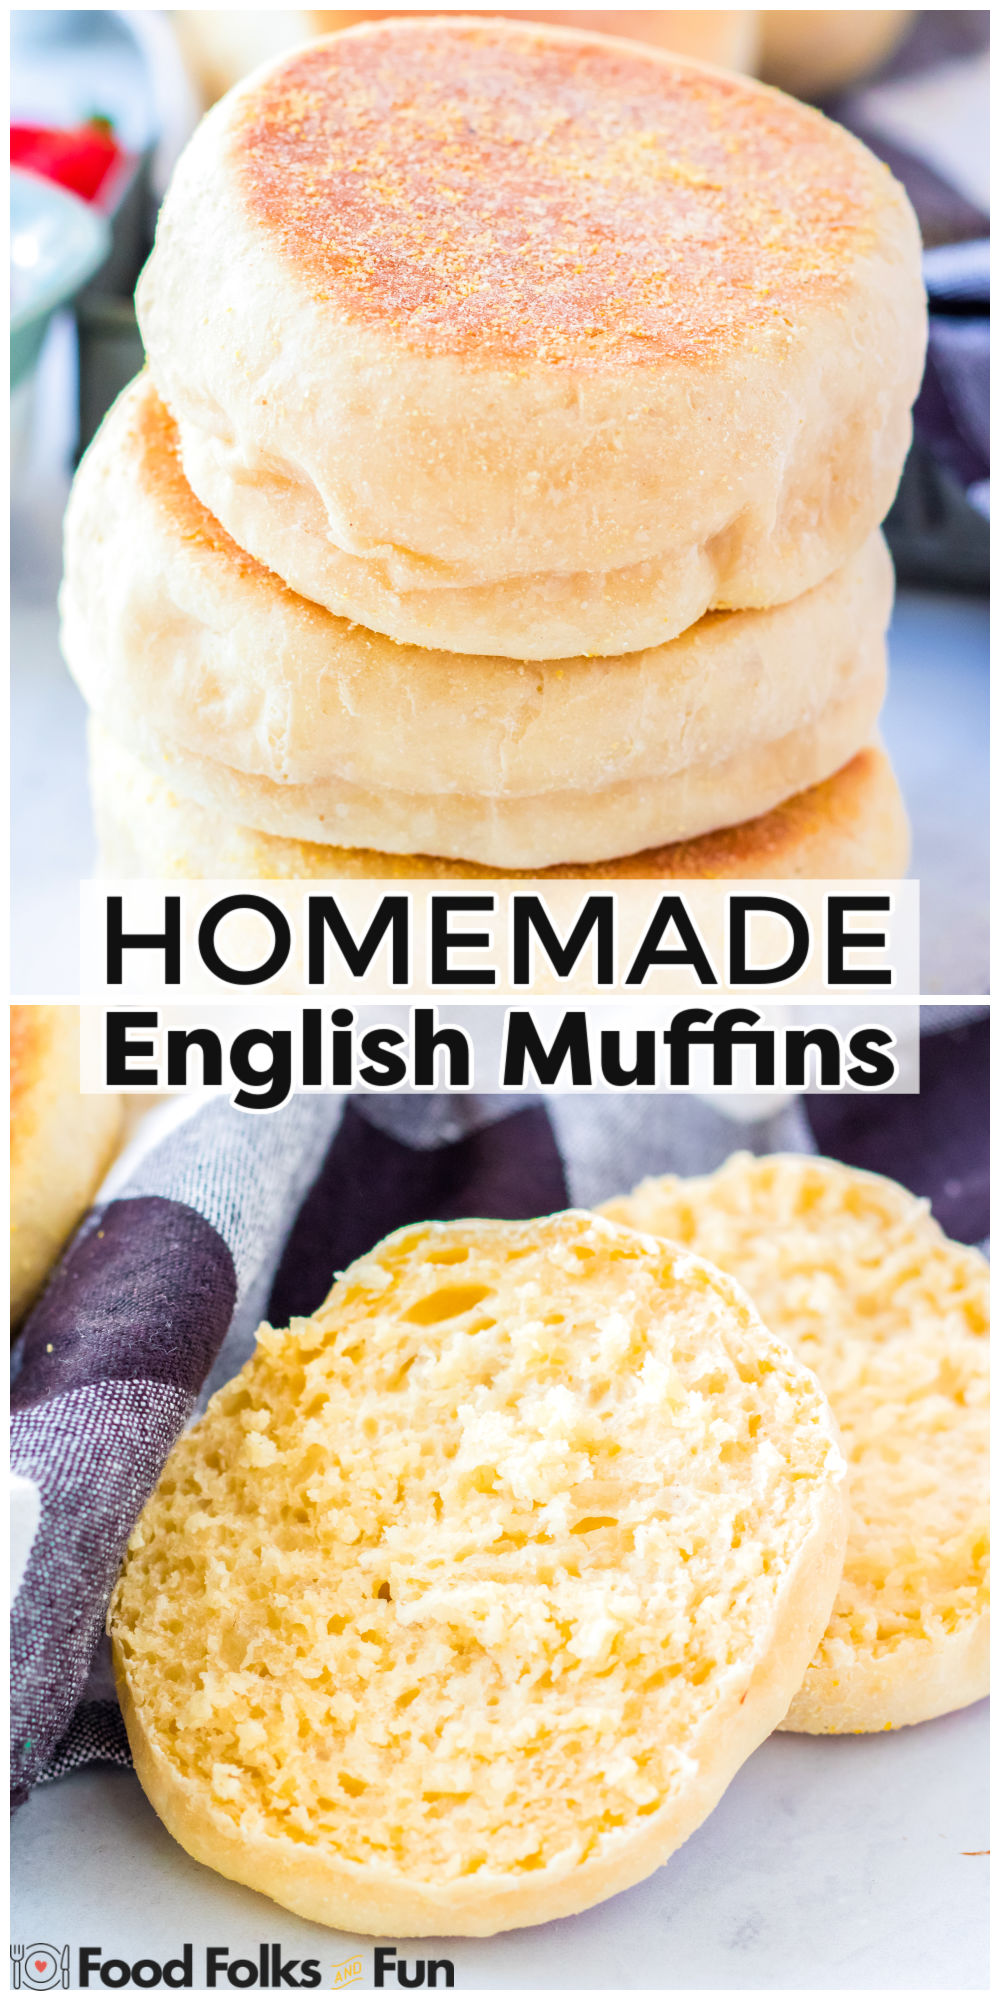 Homemade English Muffins are soft, chewy, and loaded with nooks and crannies that soak up anything you spread on them, like butter or your favorite jam! via @foodfolksandfun